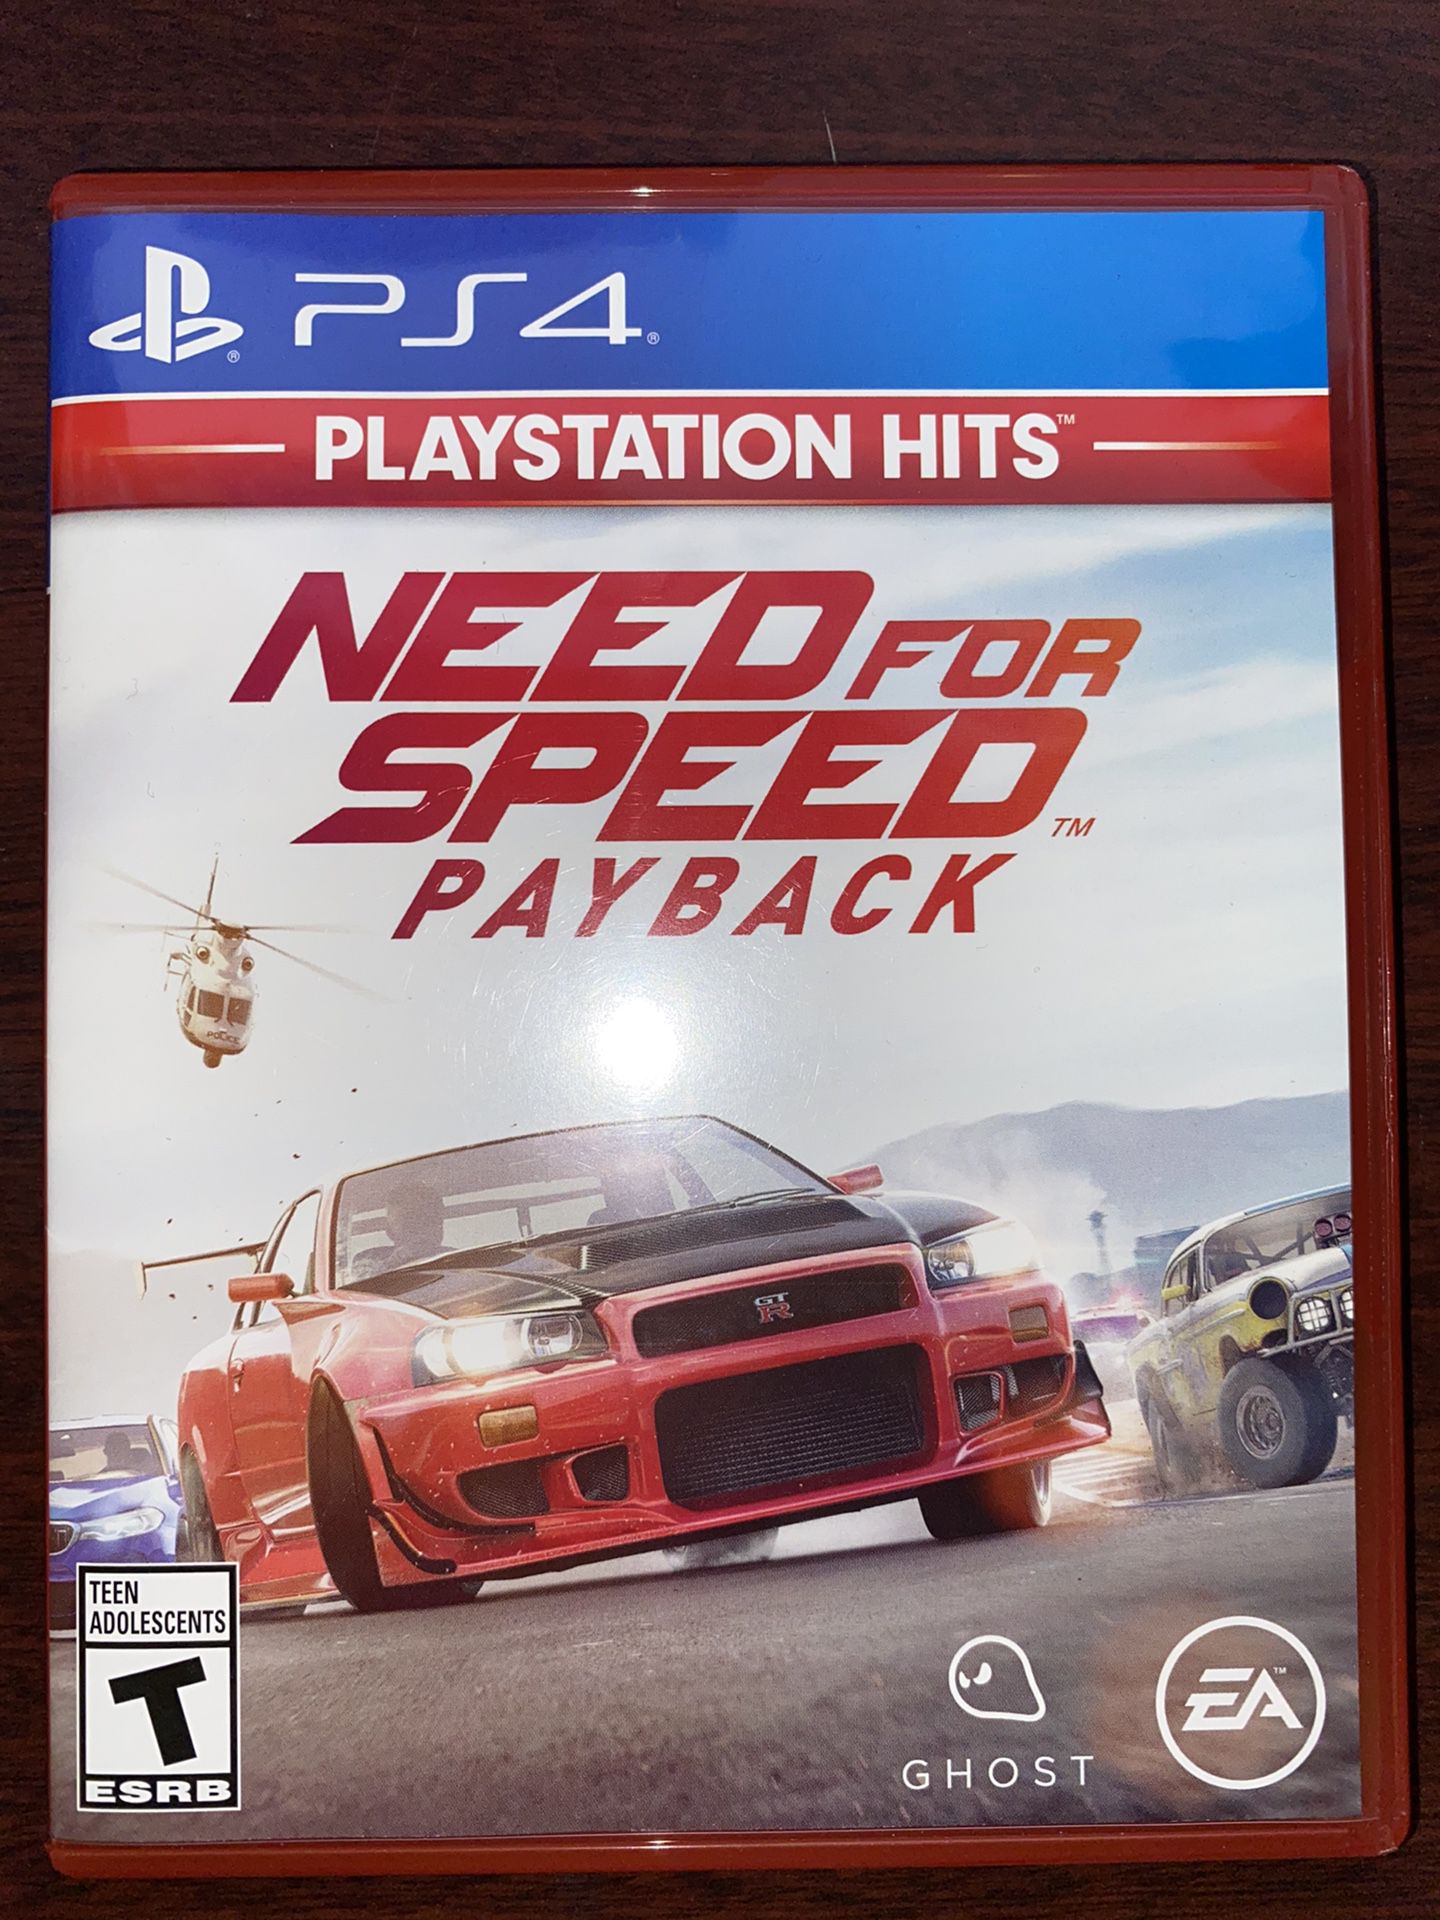 PS4 2017 Need For Speed Payback